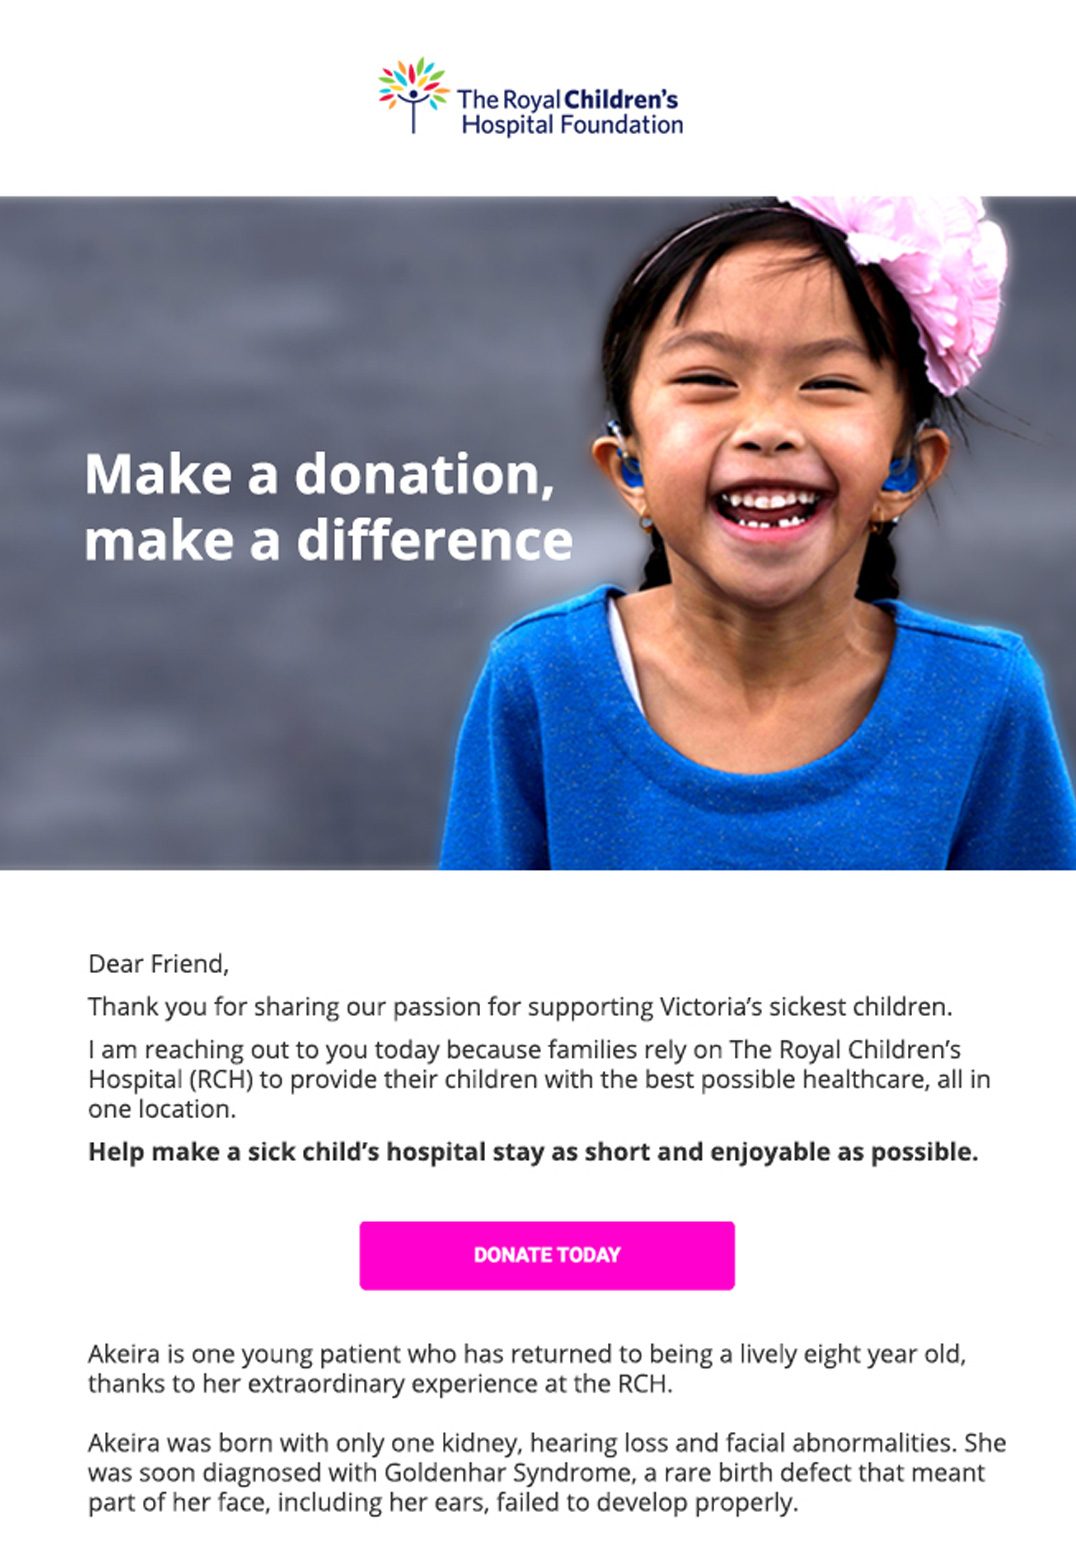 Thank you messages: Let your donors and volunteers know how much you appreciate their dedication and generosity with emails designed just for them.